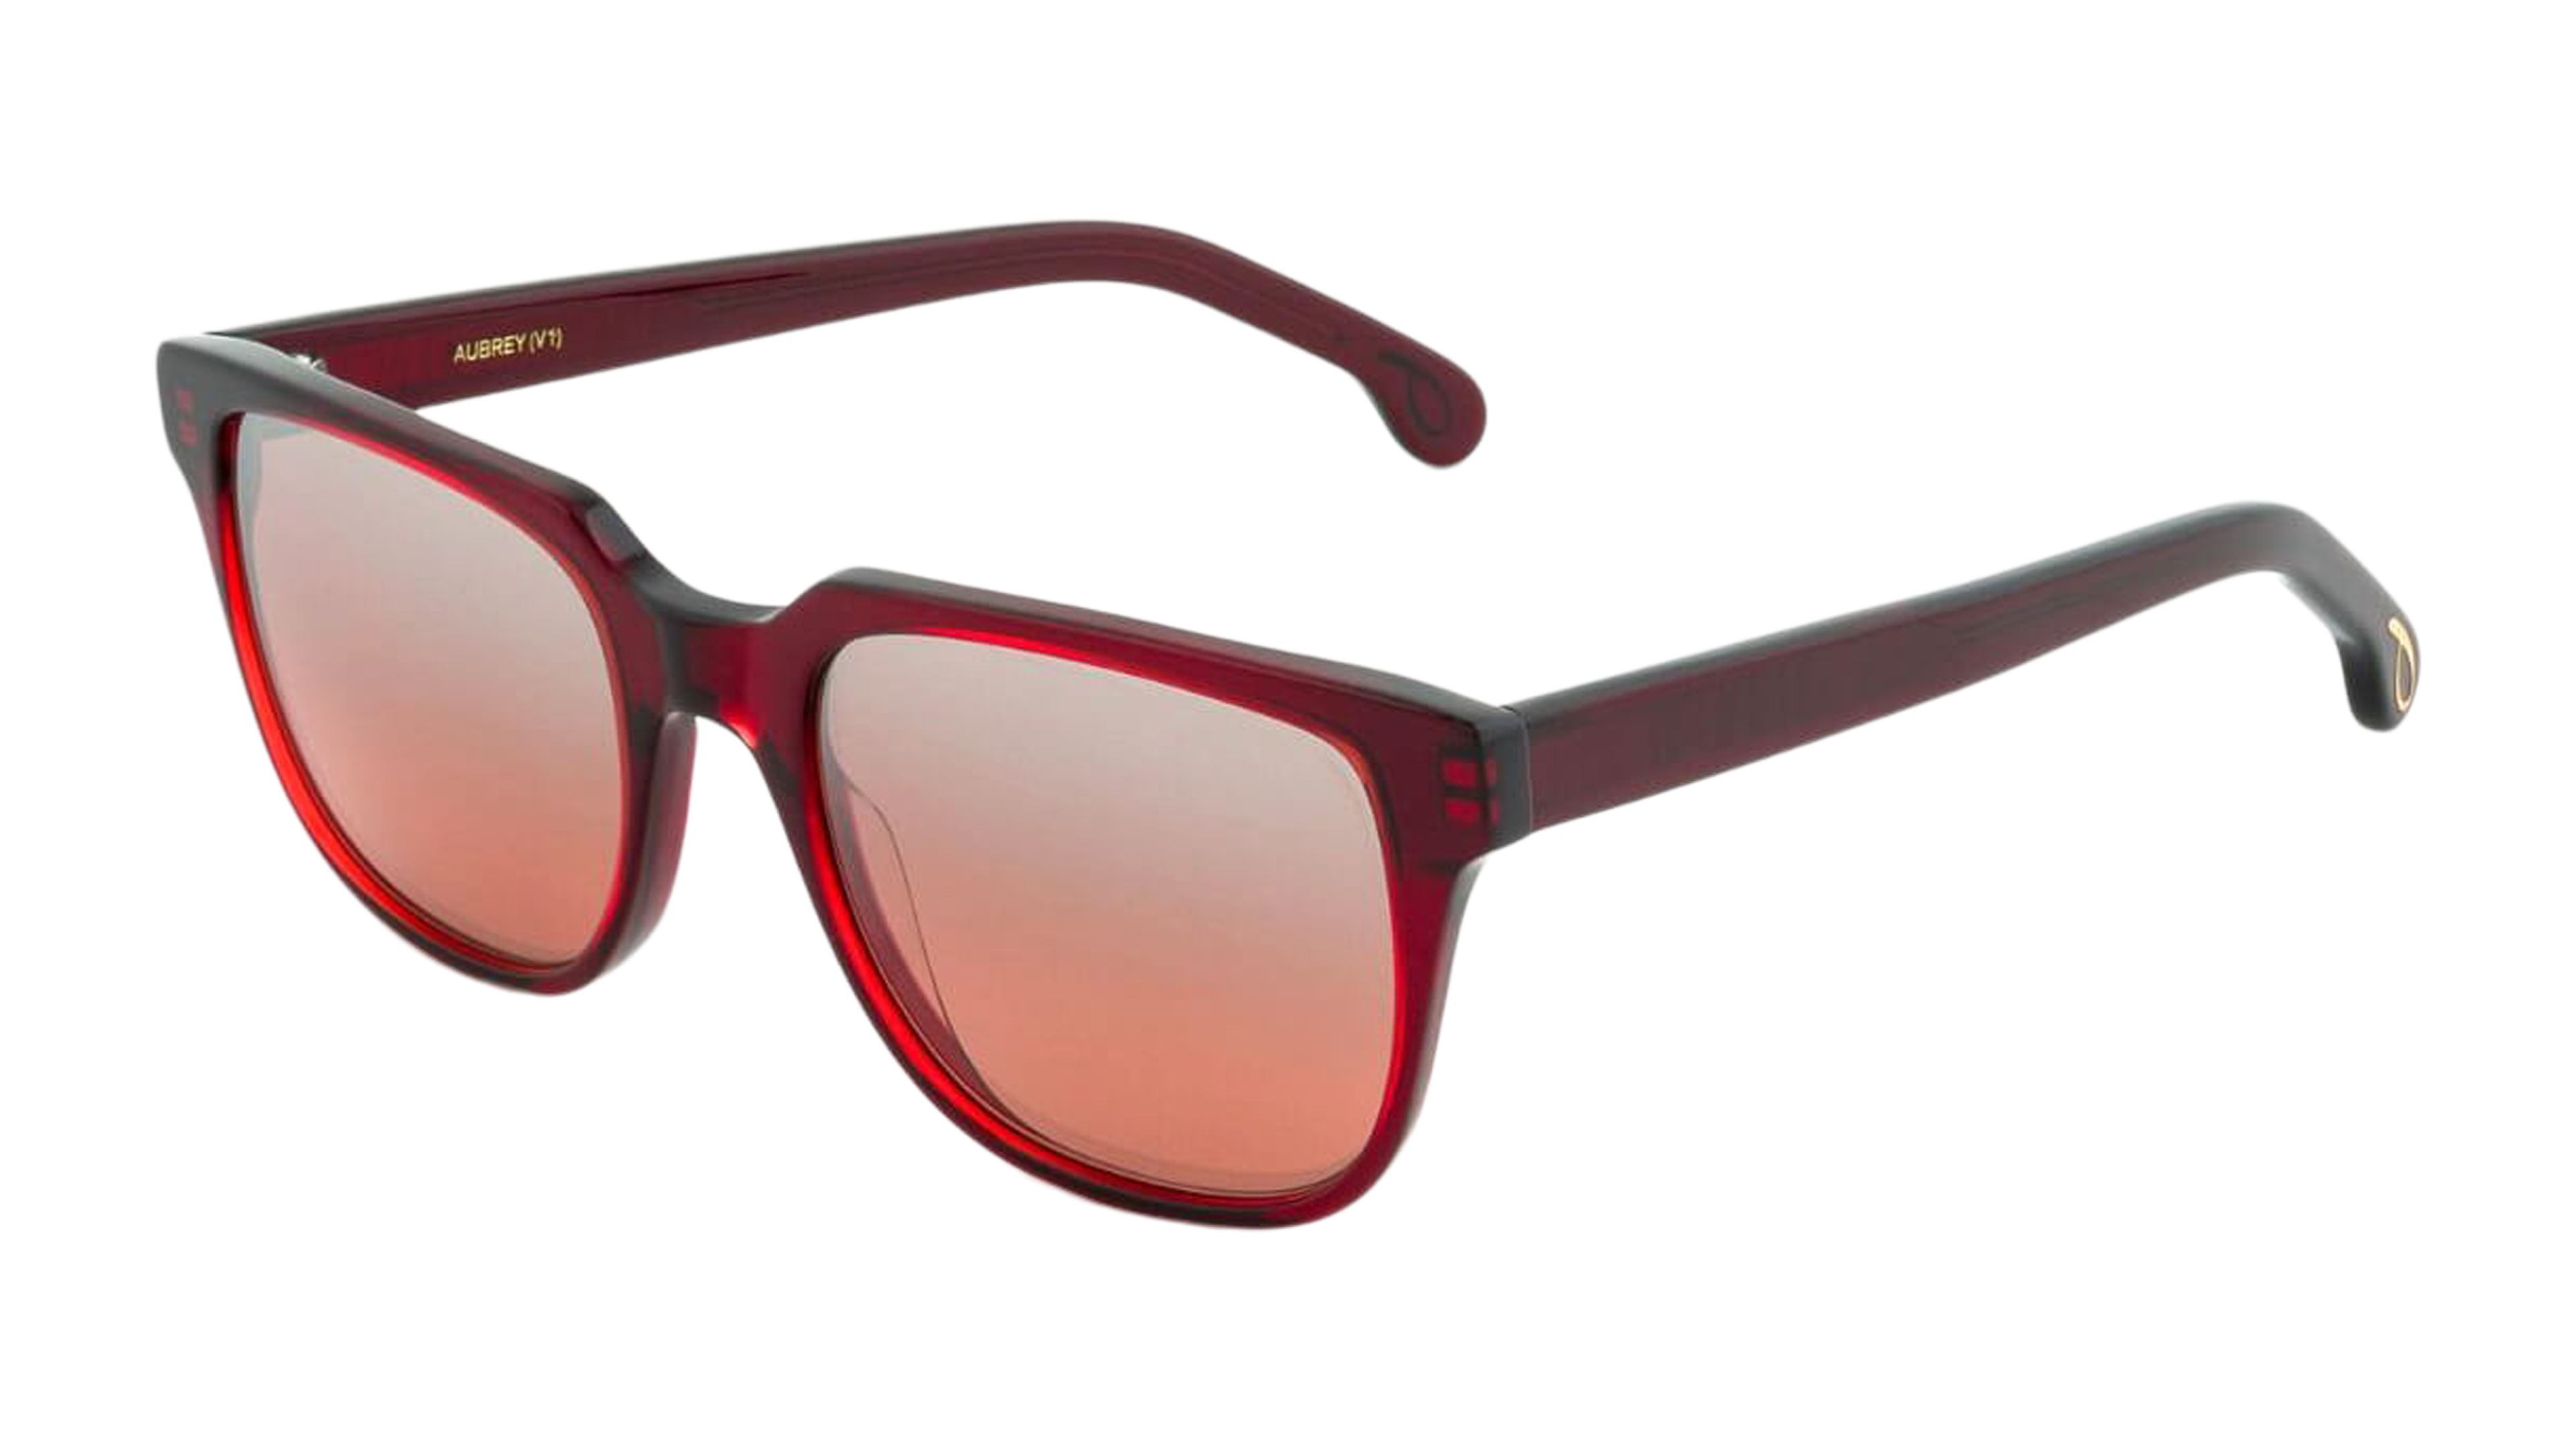 Angle_Left01 Paul Smith Aubrey PS SP010 Sunglasses Red / Red